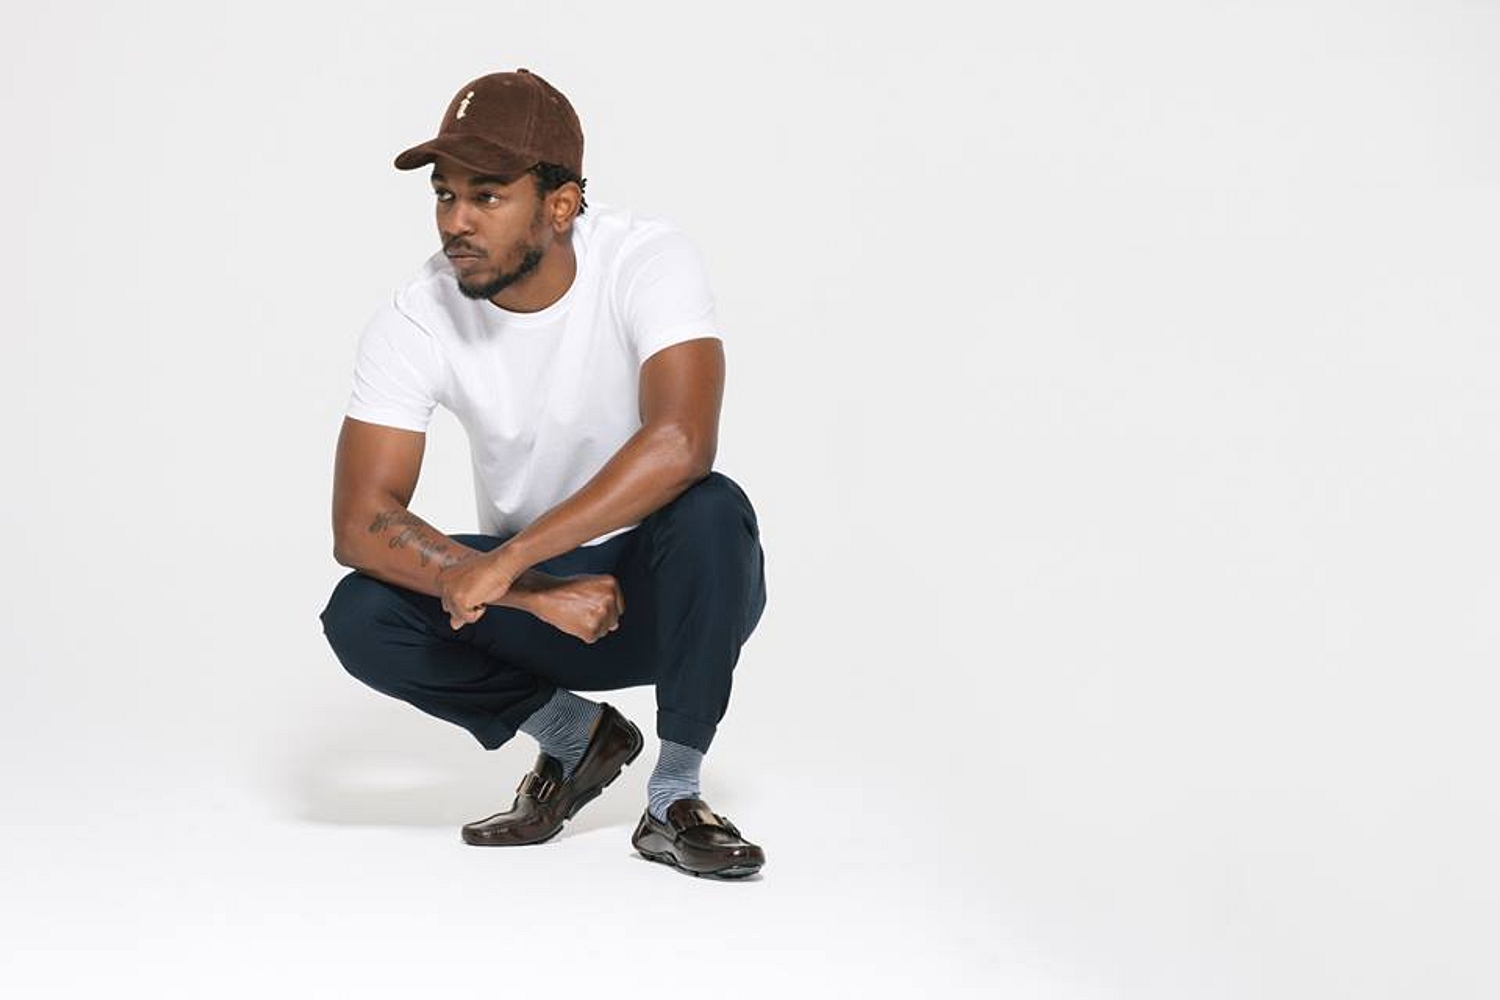 Kendrick Lamar’s verse on Kanye West’s ‘All Day’ surfaces online